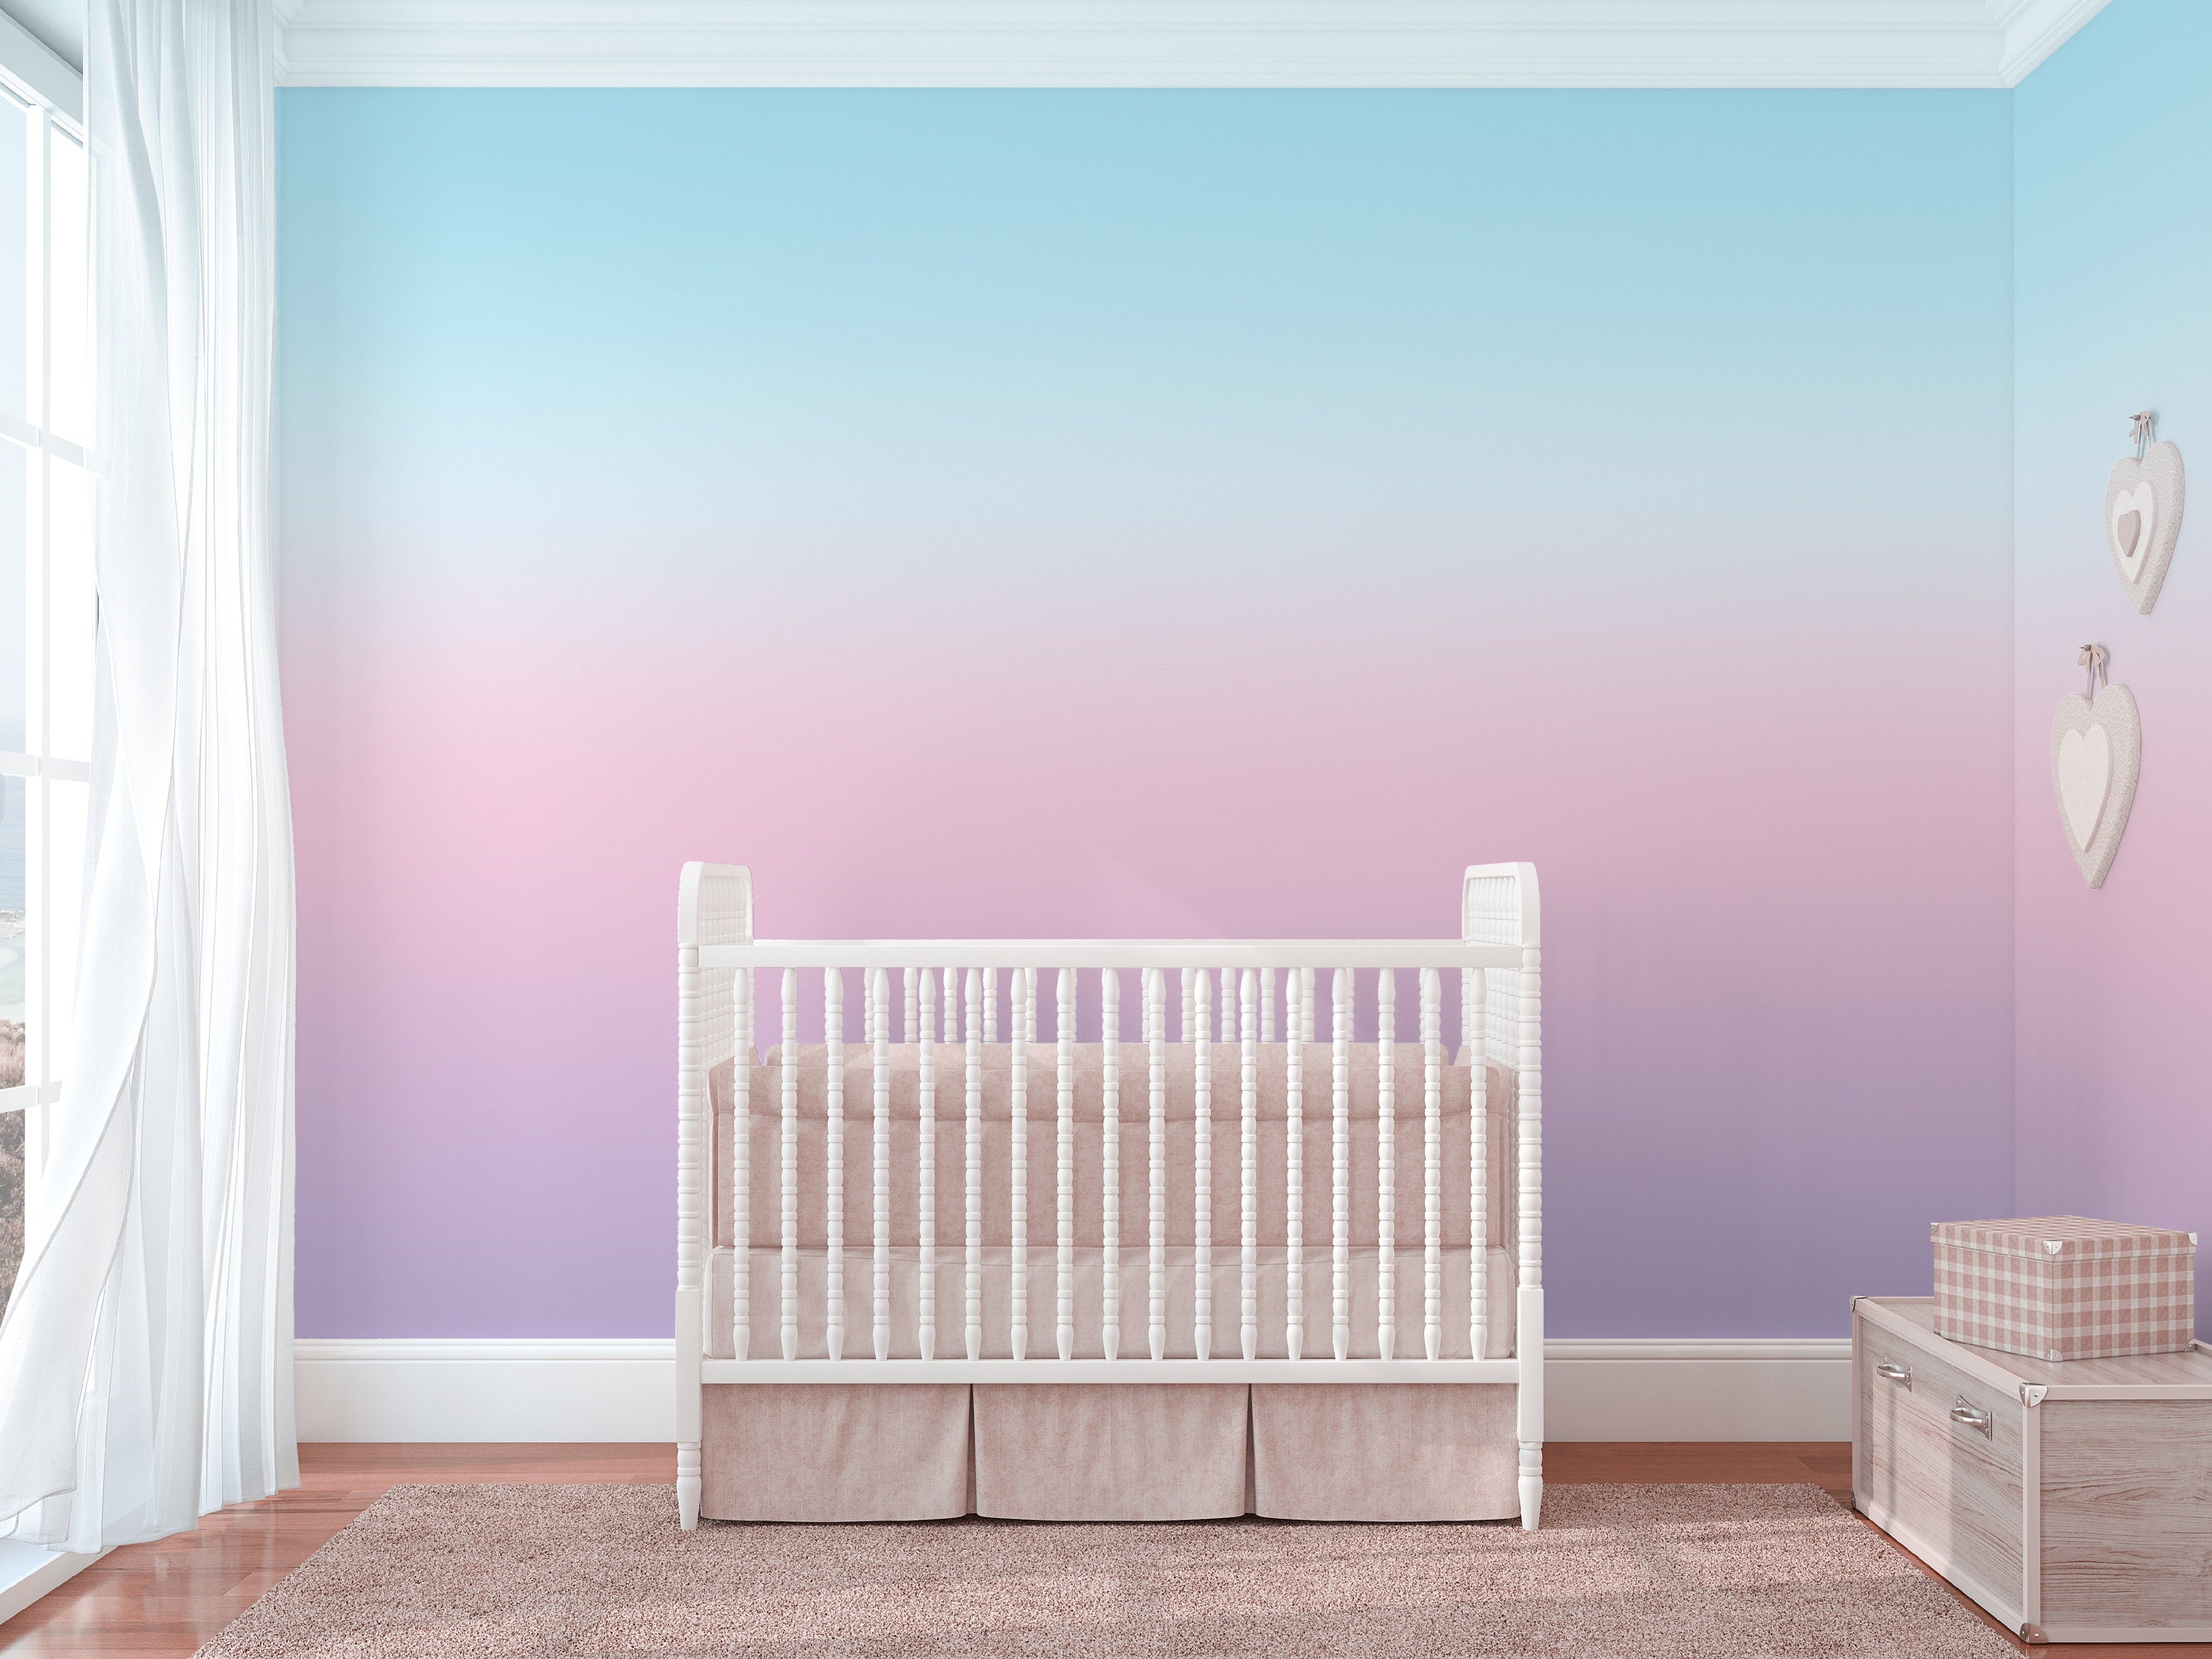 Sunset Ombre HTV and Adhesive Printed Pattern Vinyl Sheets Heat